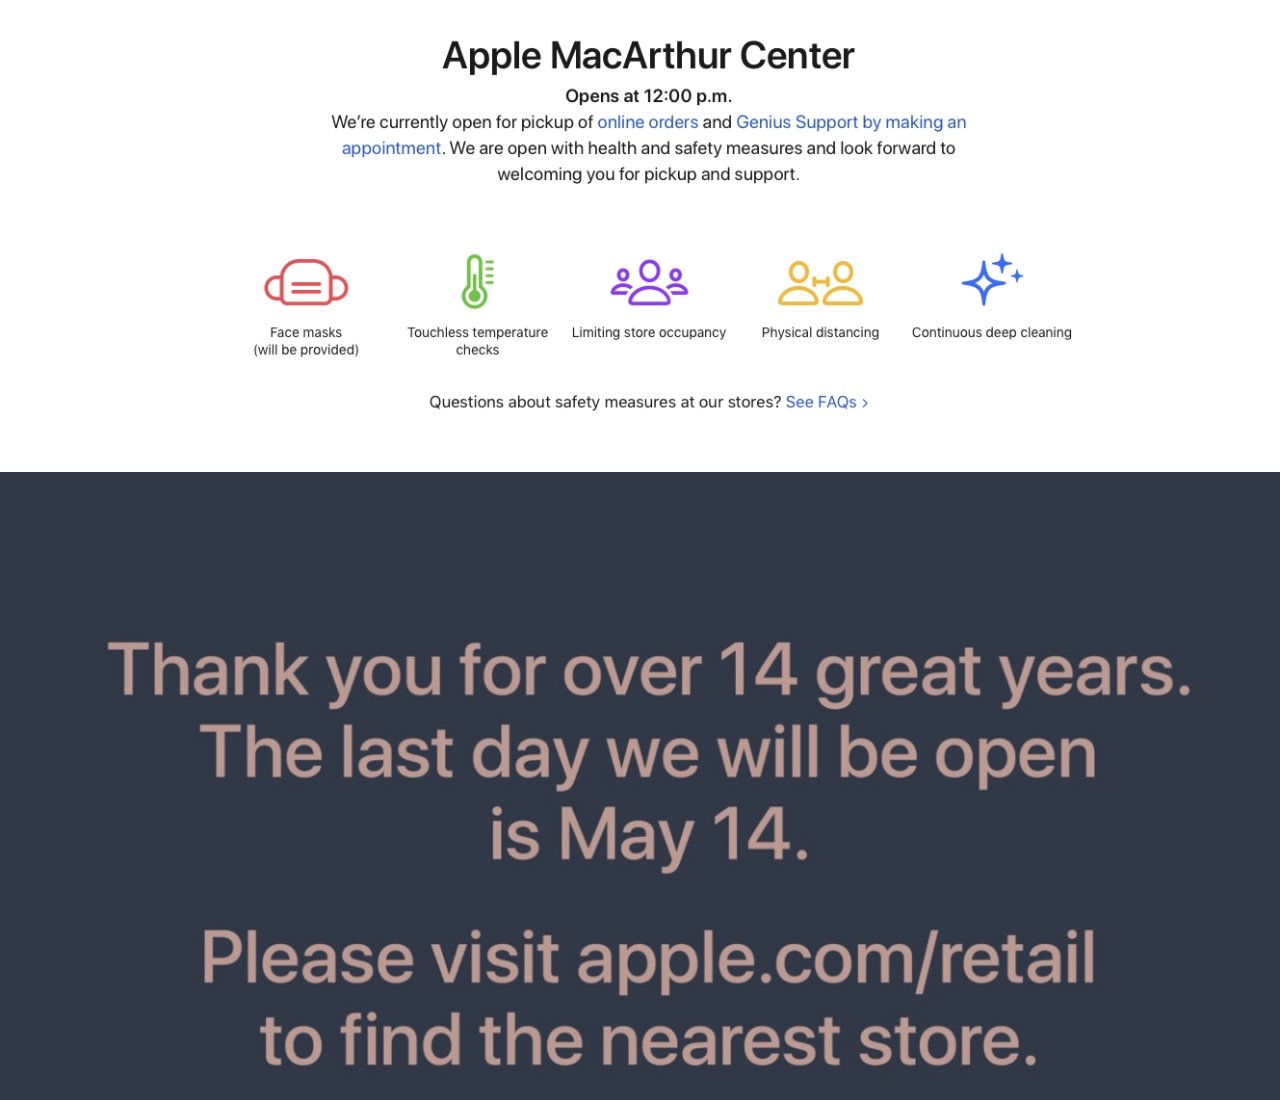 The notice displayed on Apple MacArthur Center's site